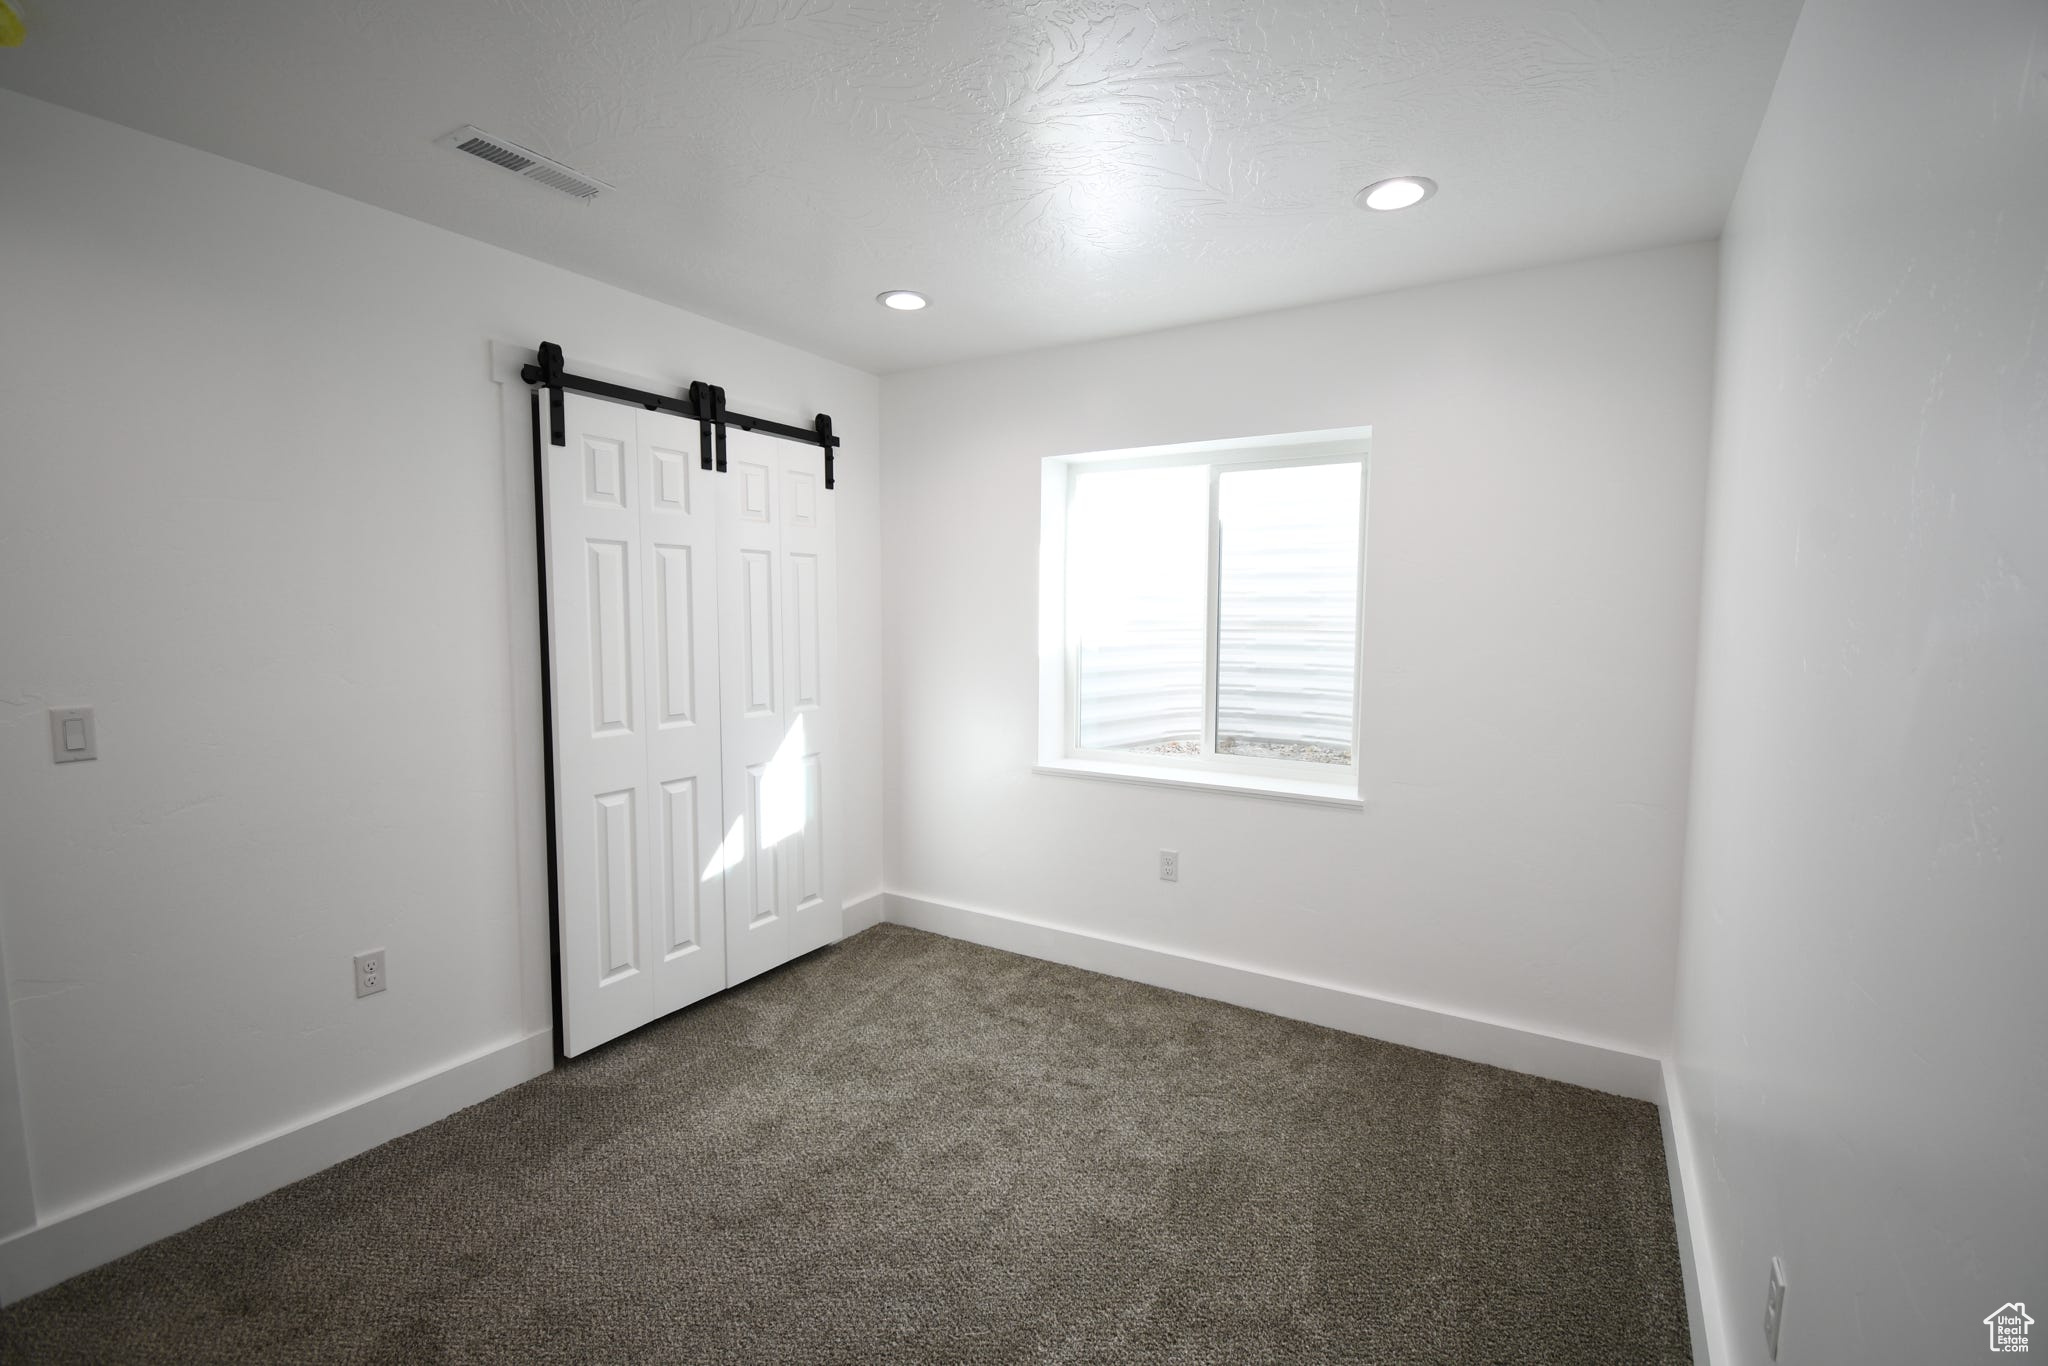 Unfurnished bedroom featuring dark colored carpet, a closet, and a barn door